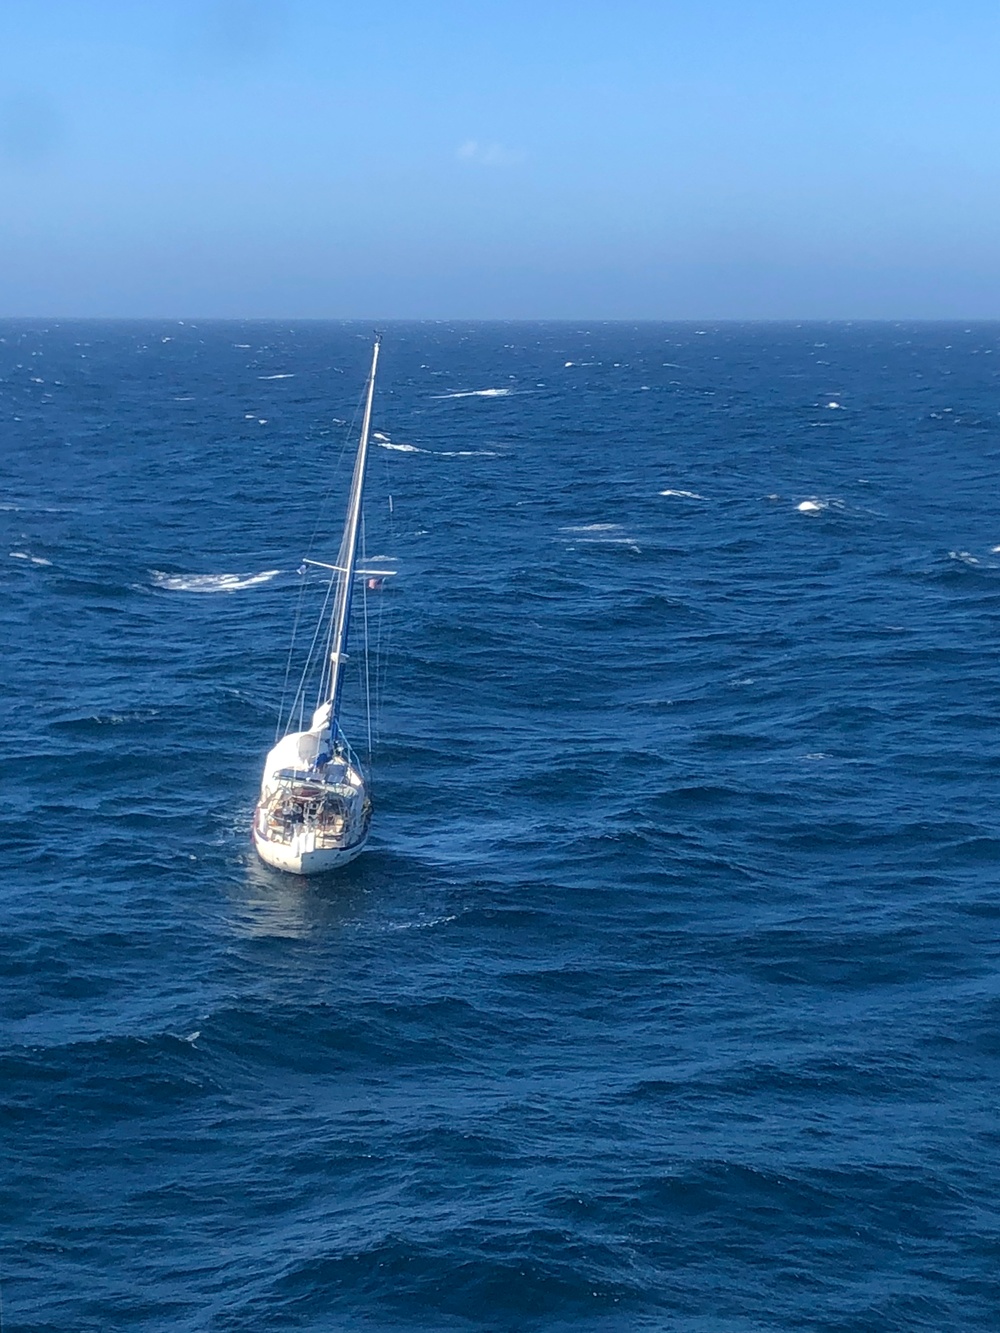 Coast Guard rescues 2 from sailboat 77 miles southwest of Half Moon Bay, Calif.